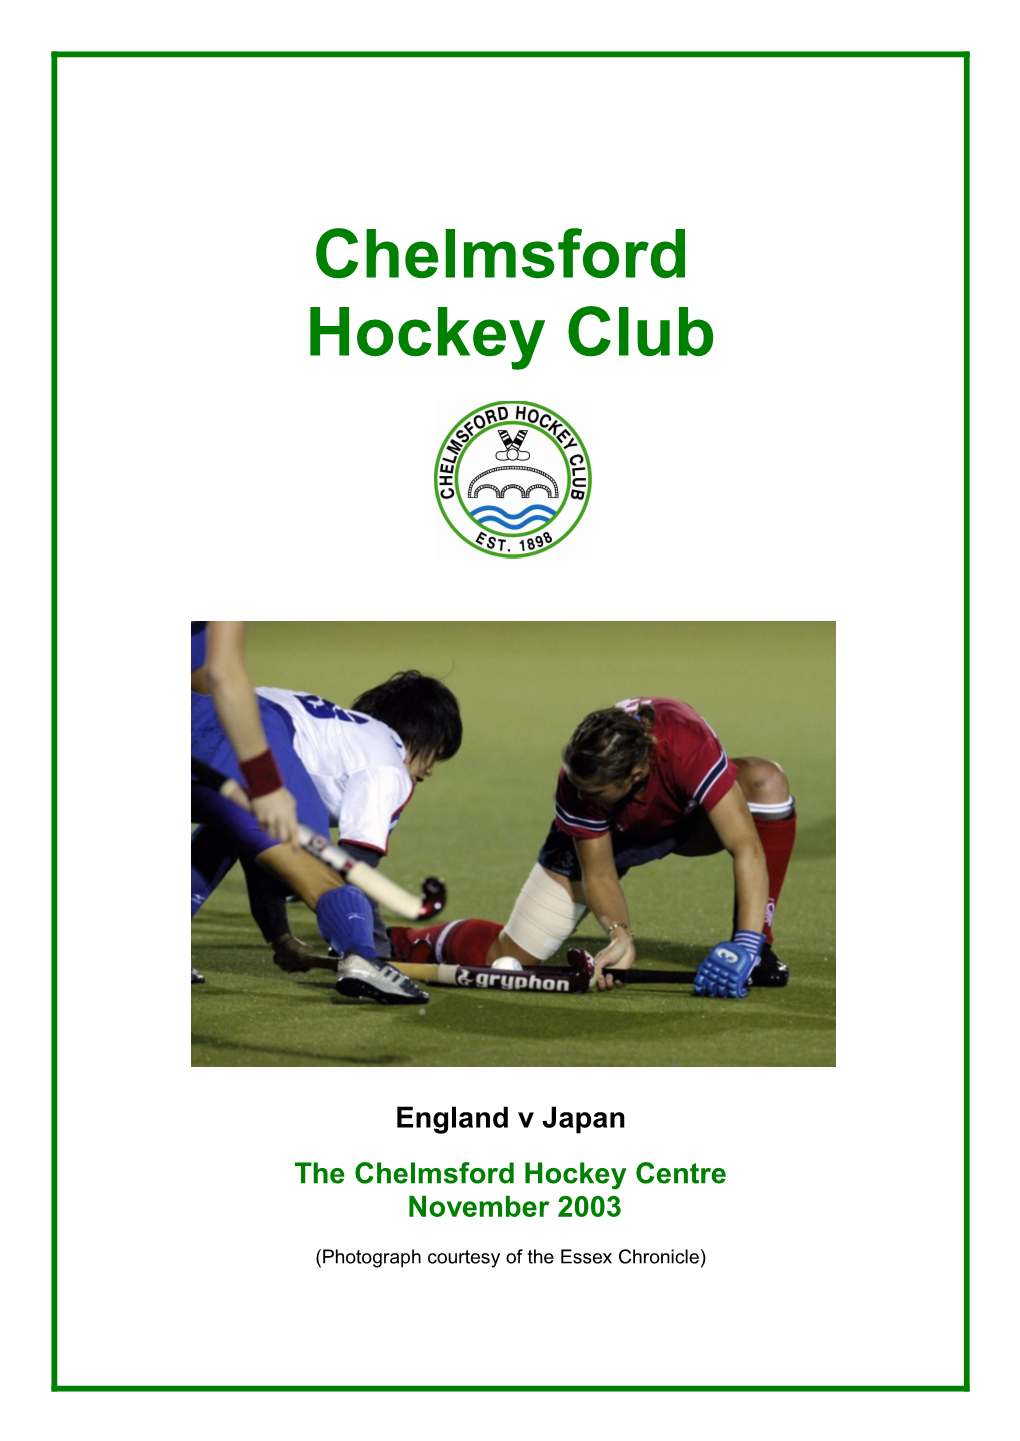 The Chelmsford Hockey Centre